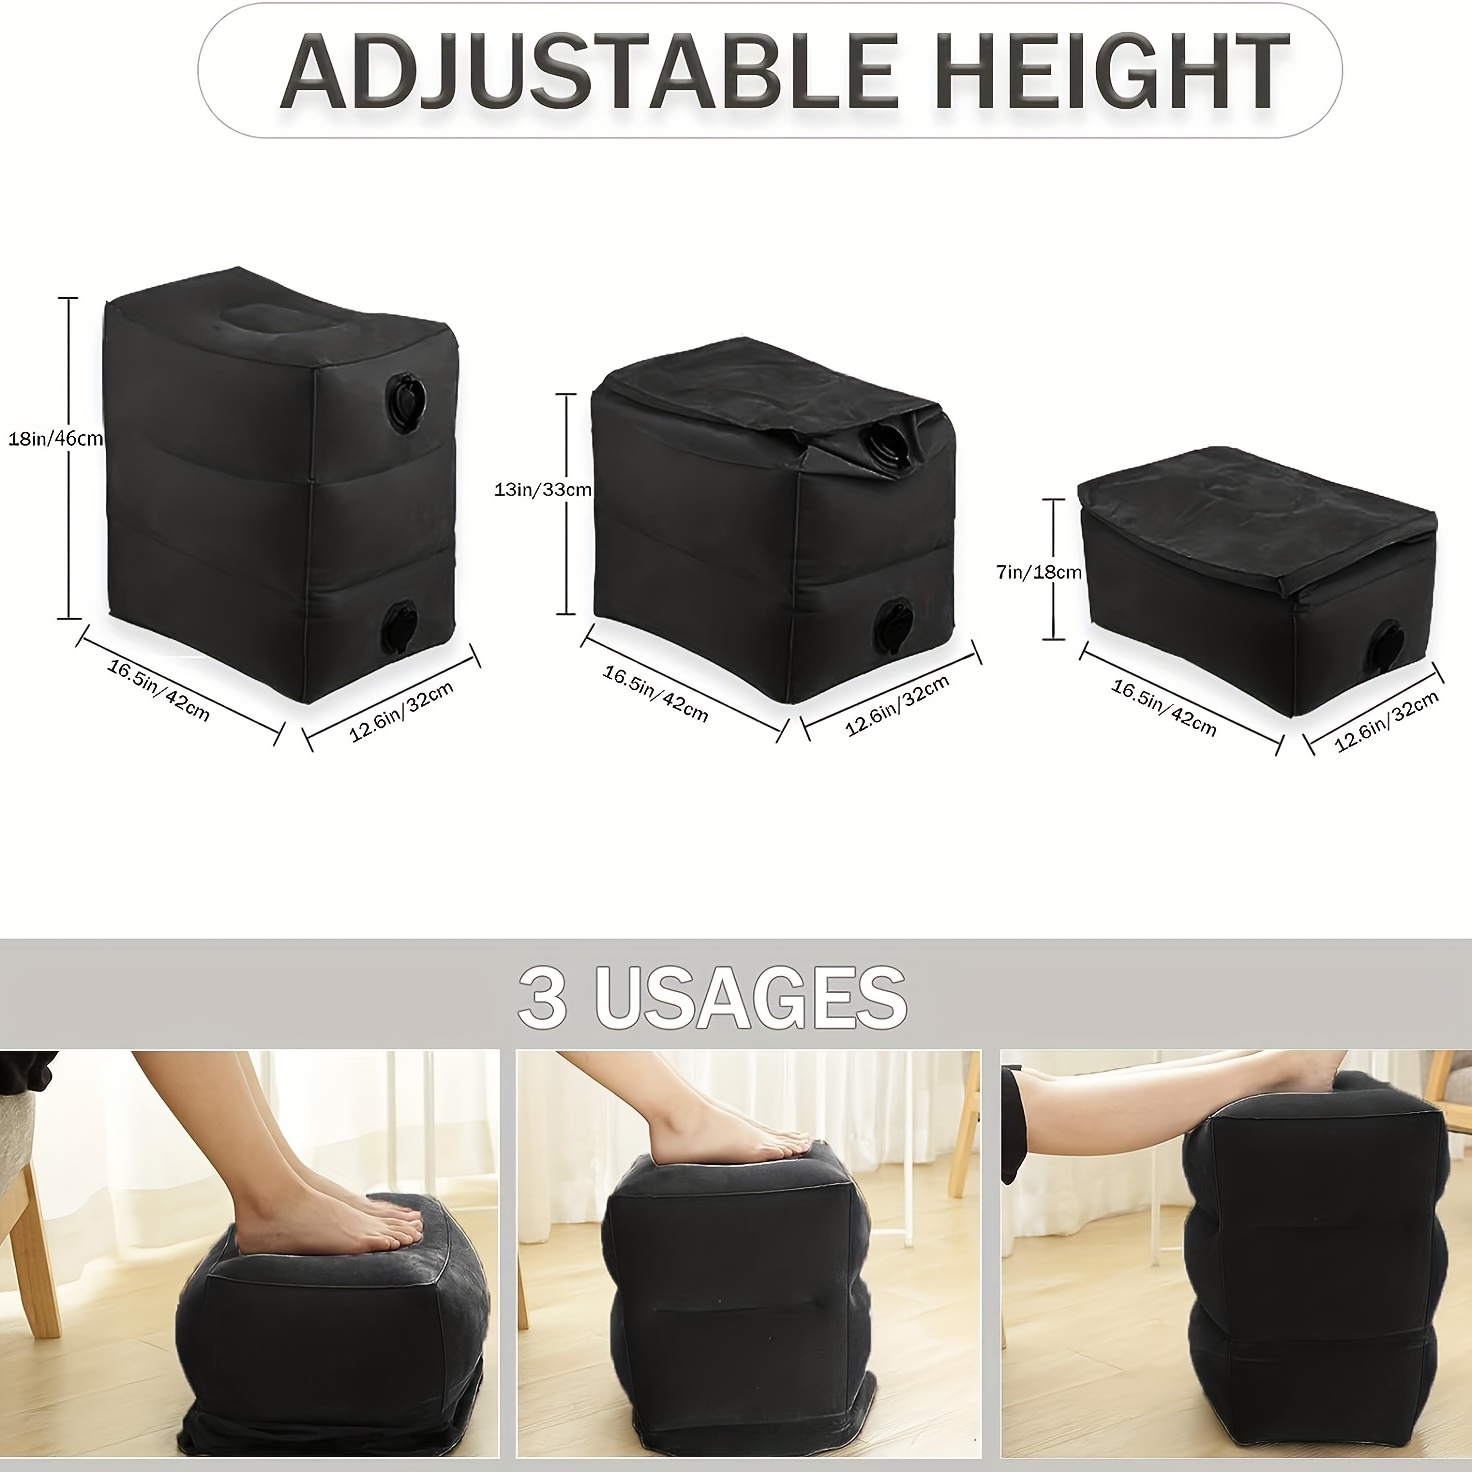 Inflatable Height Adjustable Foot Rest Pillow